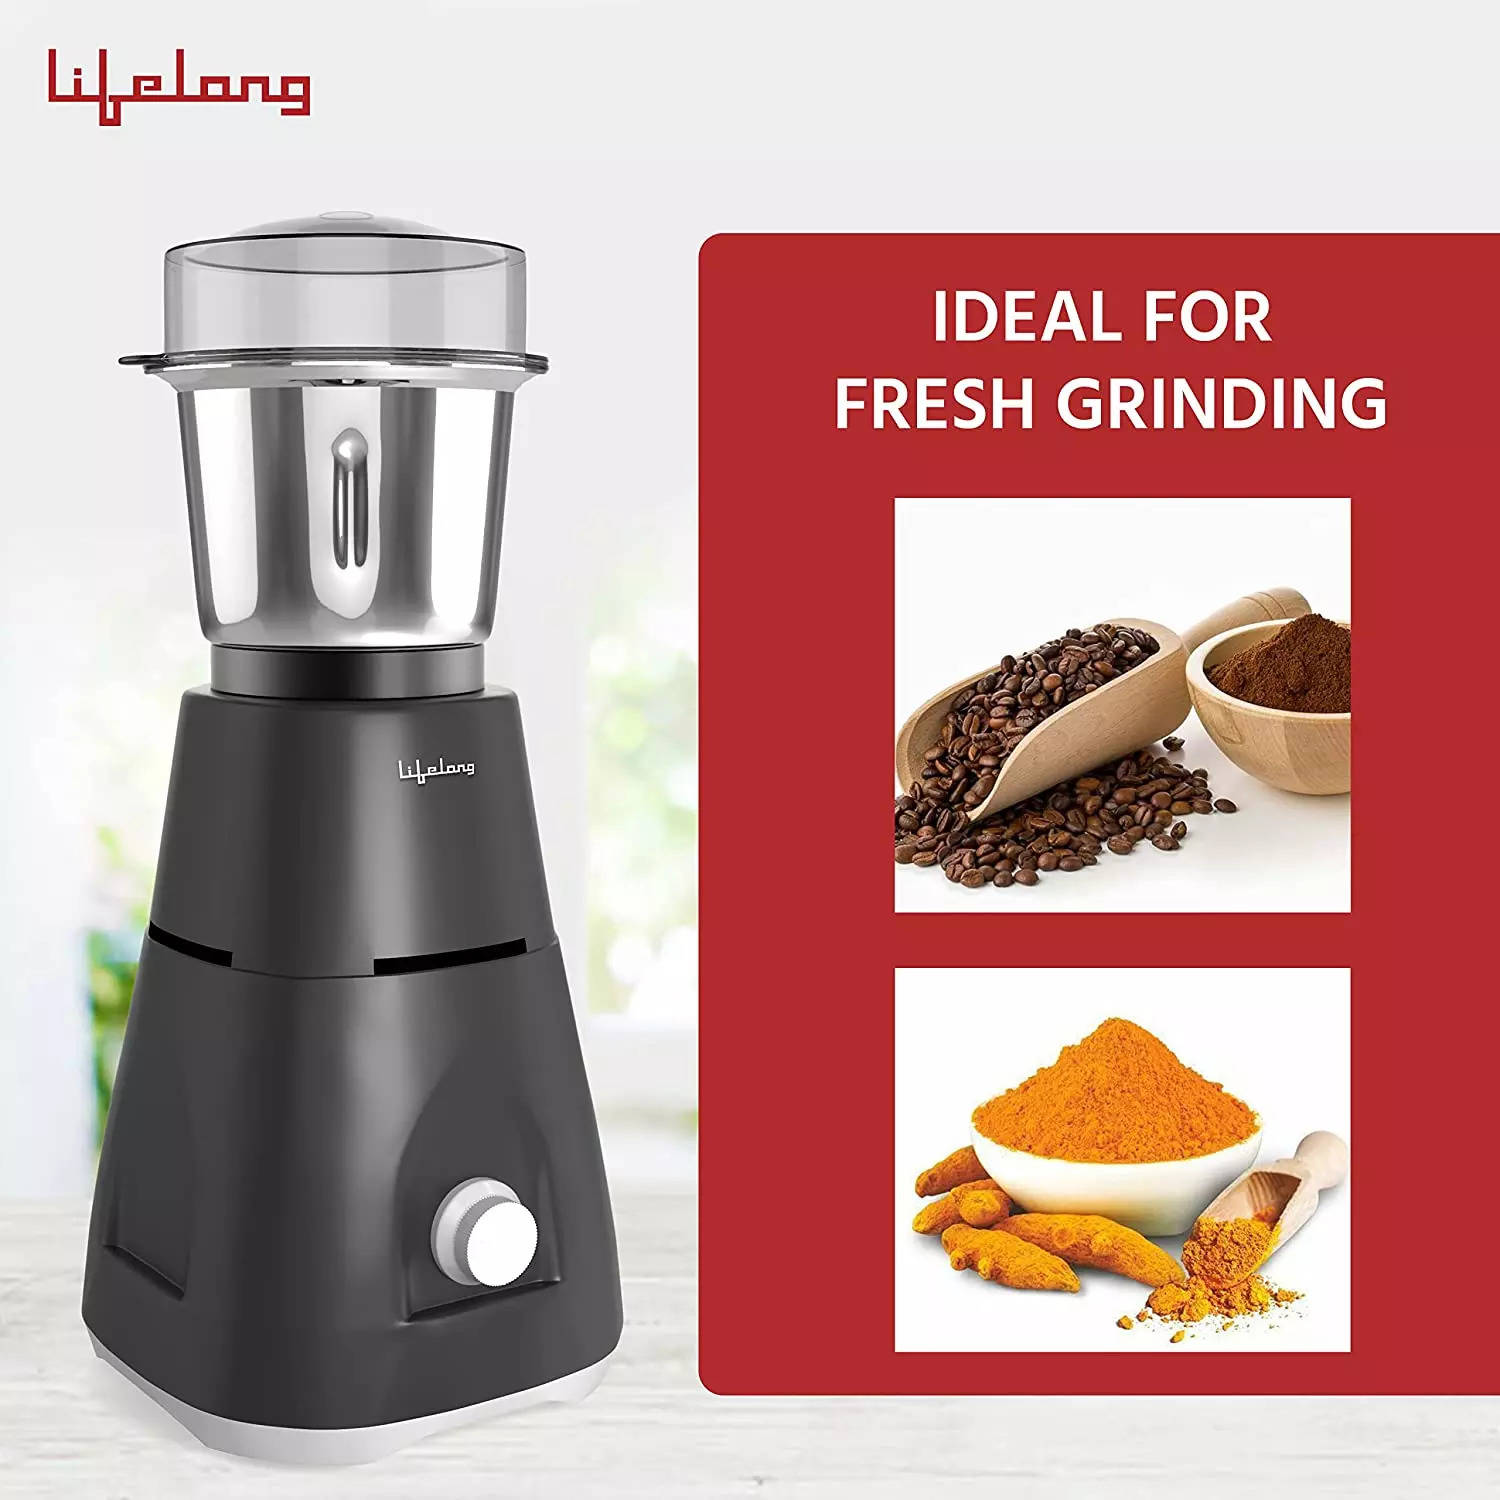 Mini Mixer Grinder: Whip up delicious dishes with compact Mixer